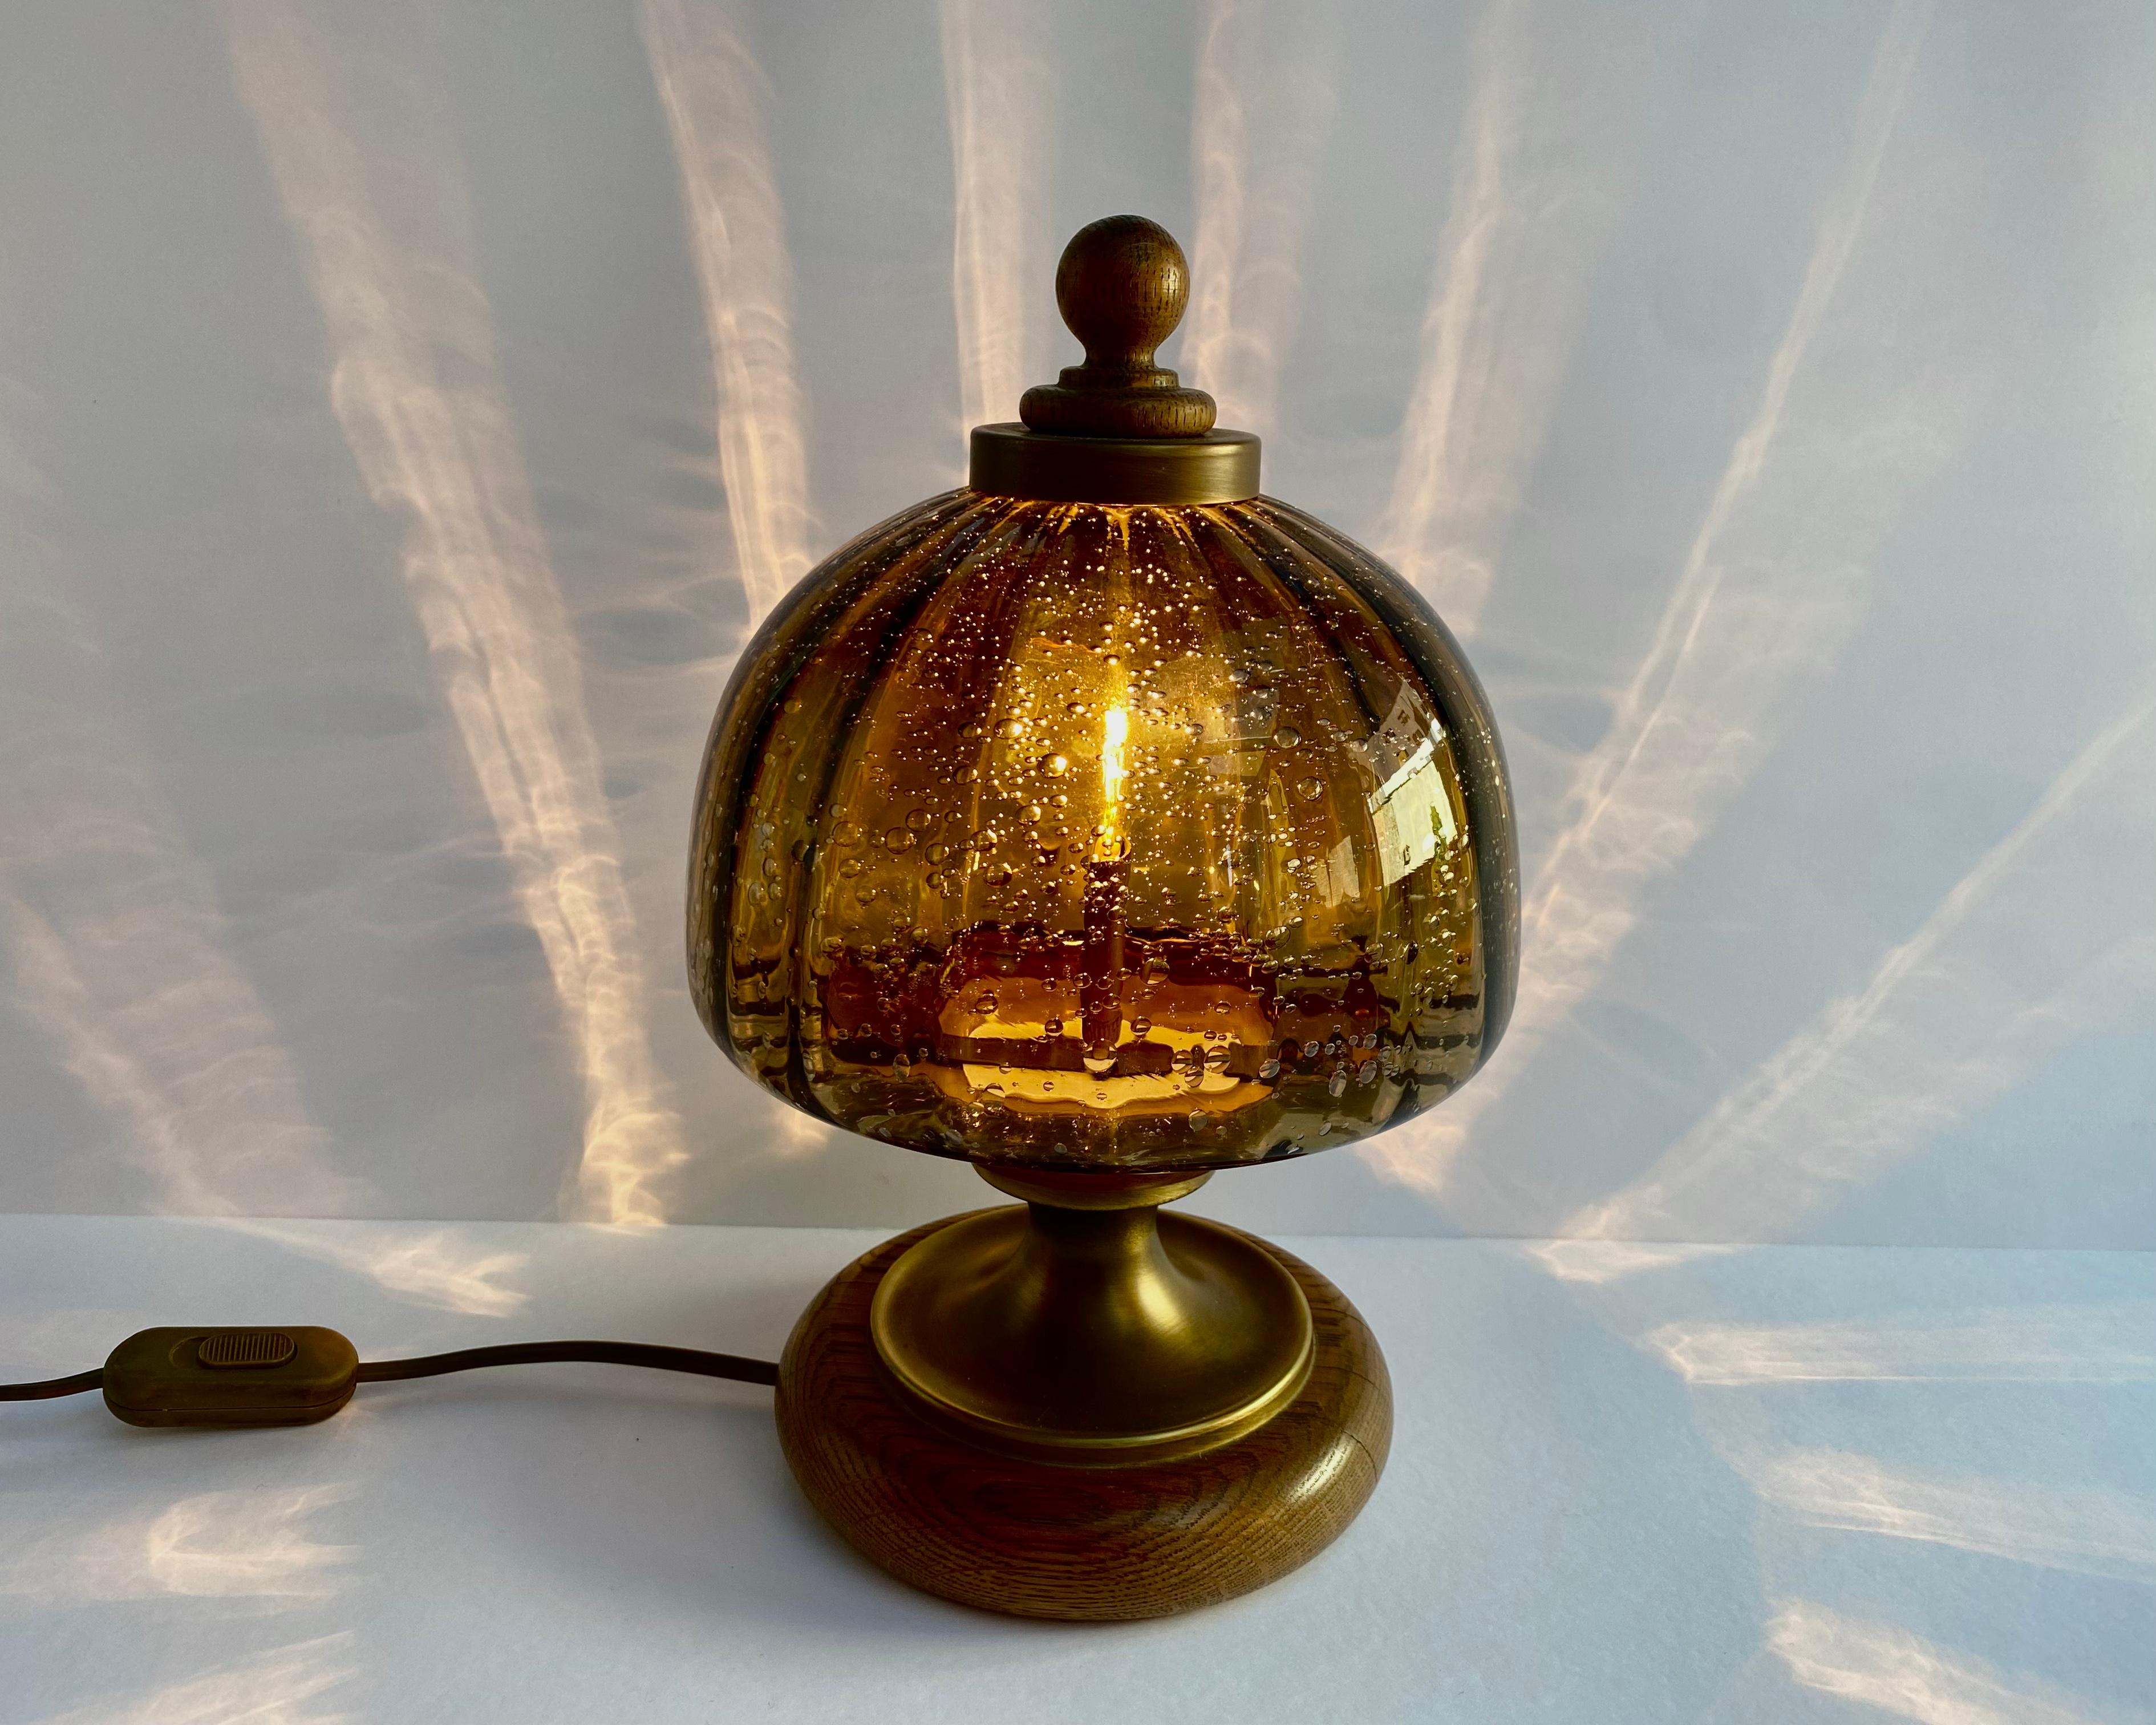 Well manufactured Art Deco style table lamp made from brass and wood installed with hand-blown art glass shade with bubbles.

Germany, 1970s.

The Table Lamp is ideal for traditional living spaces or for adding a cozy touch to any room. 

The right